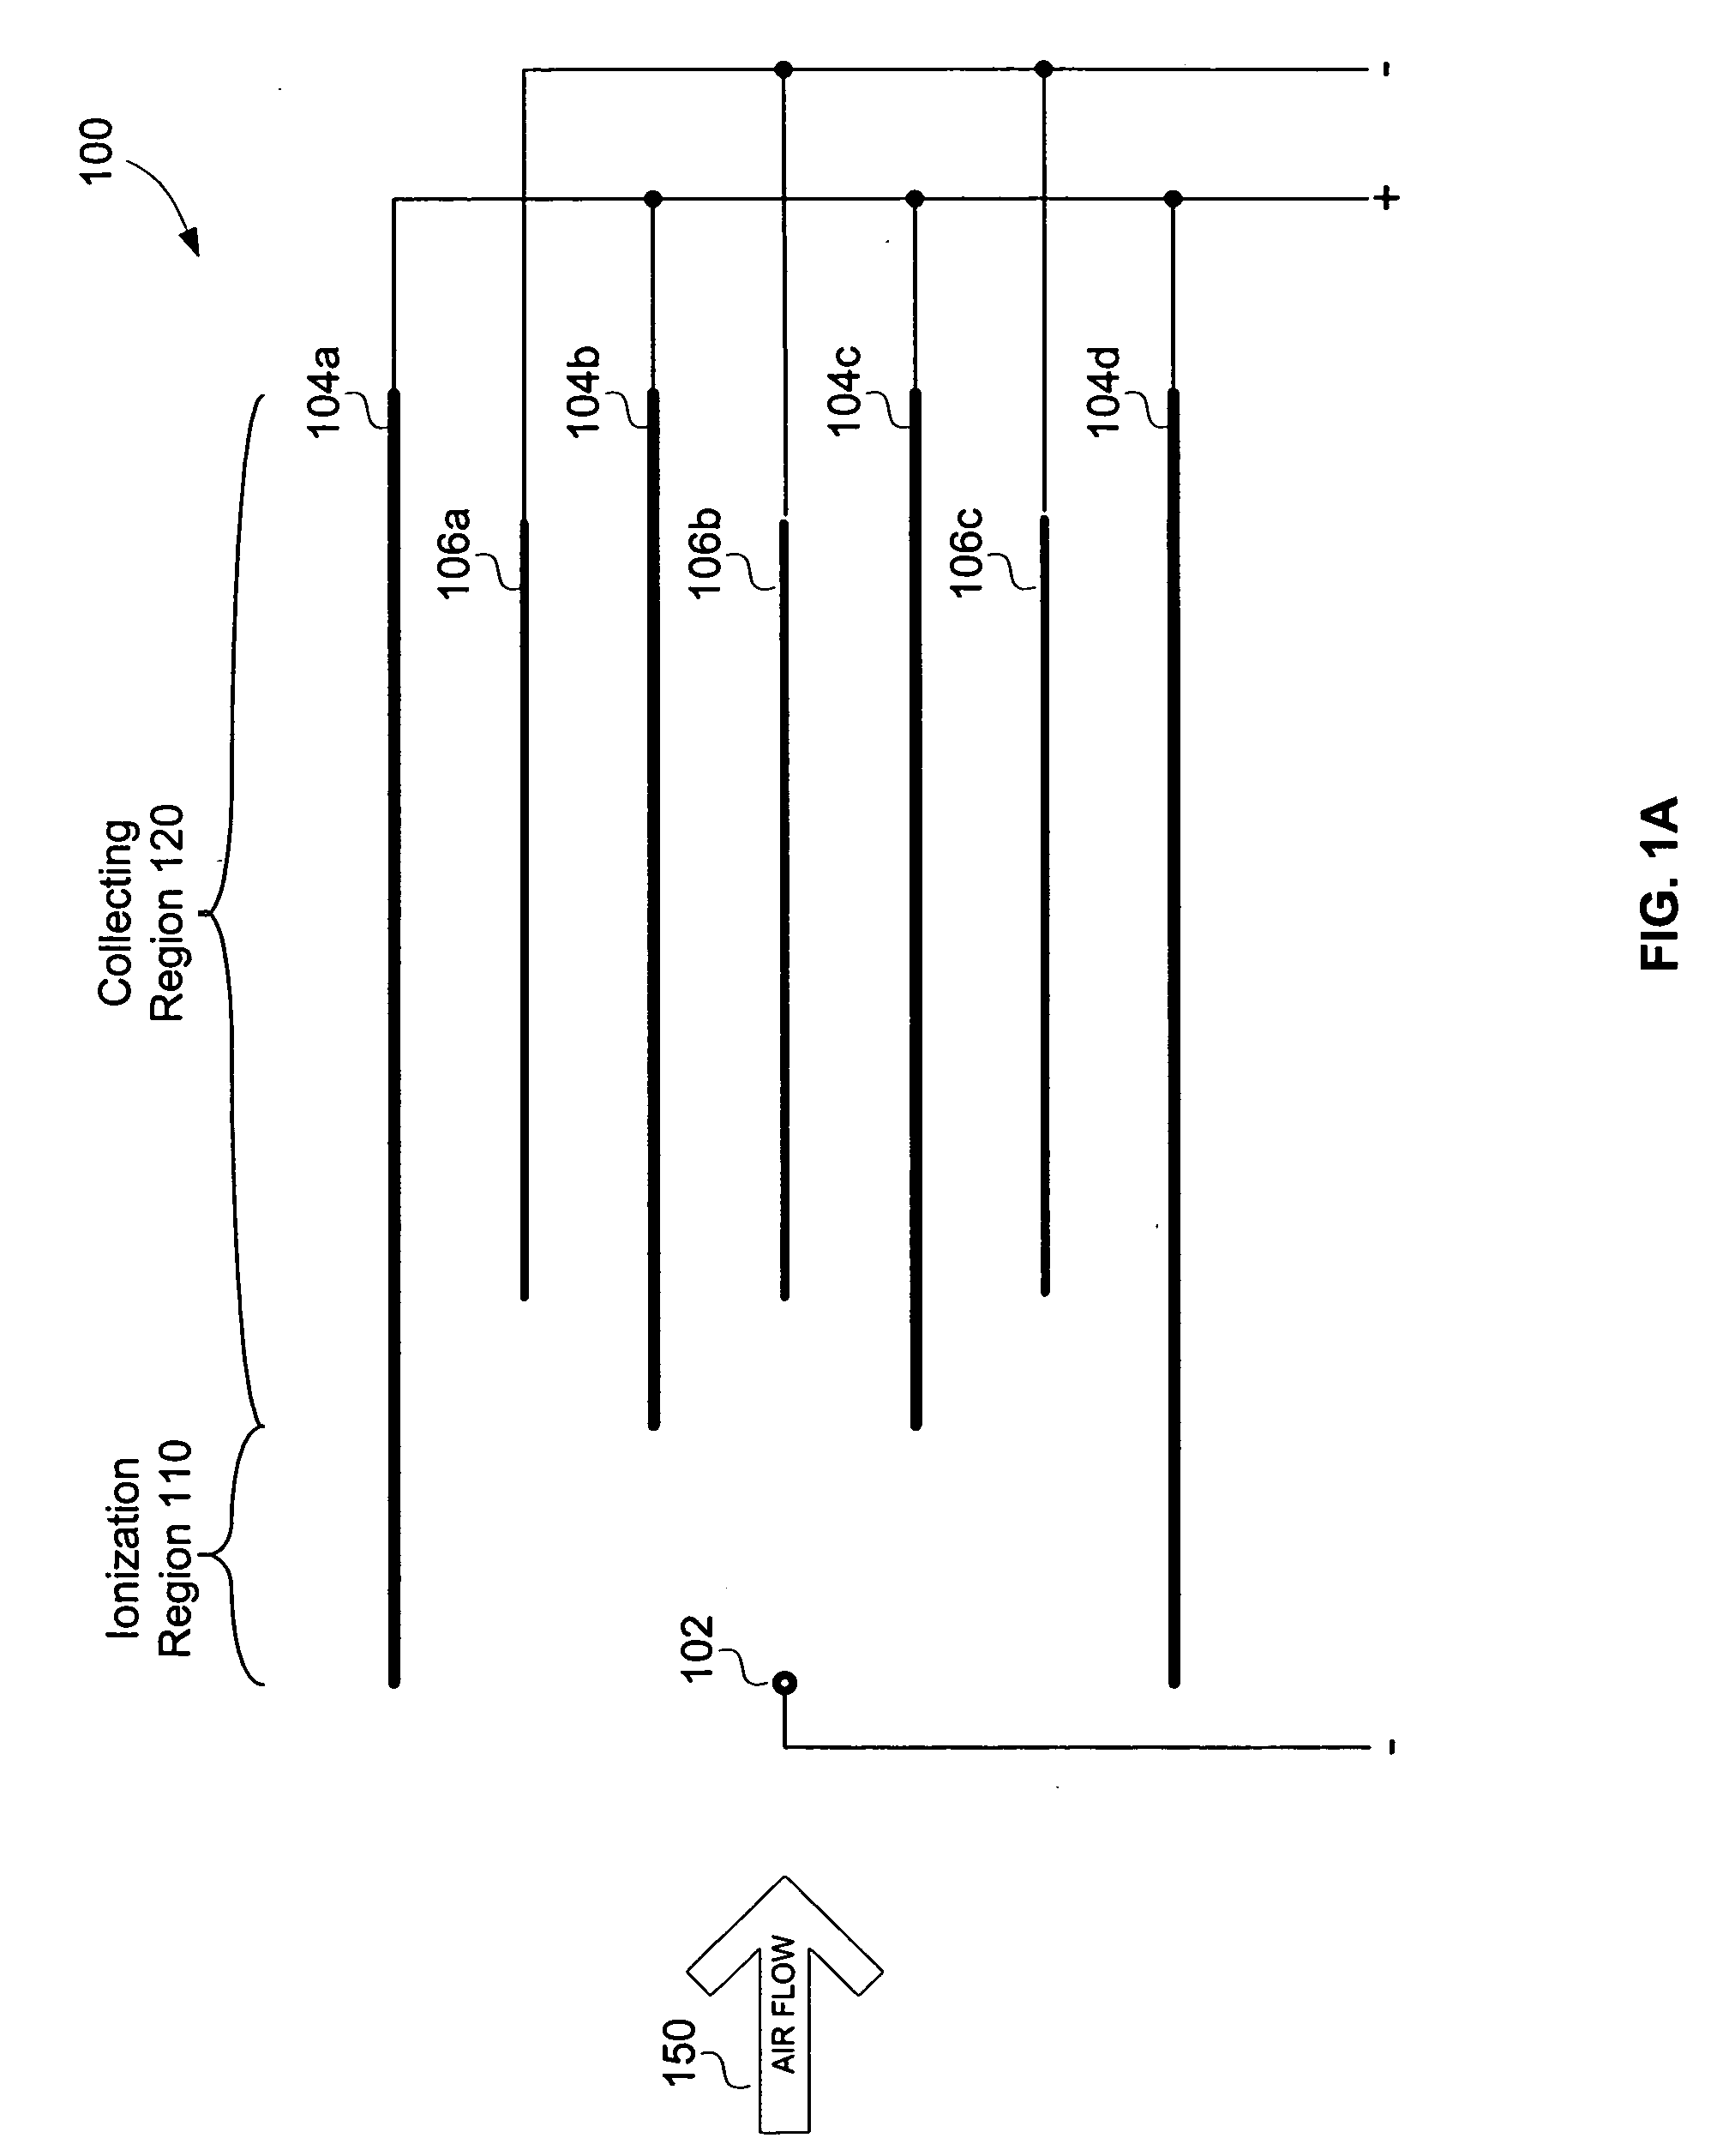 Electrostatic precipitators with insulated driver electrodes